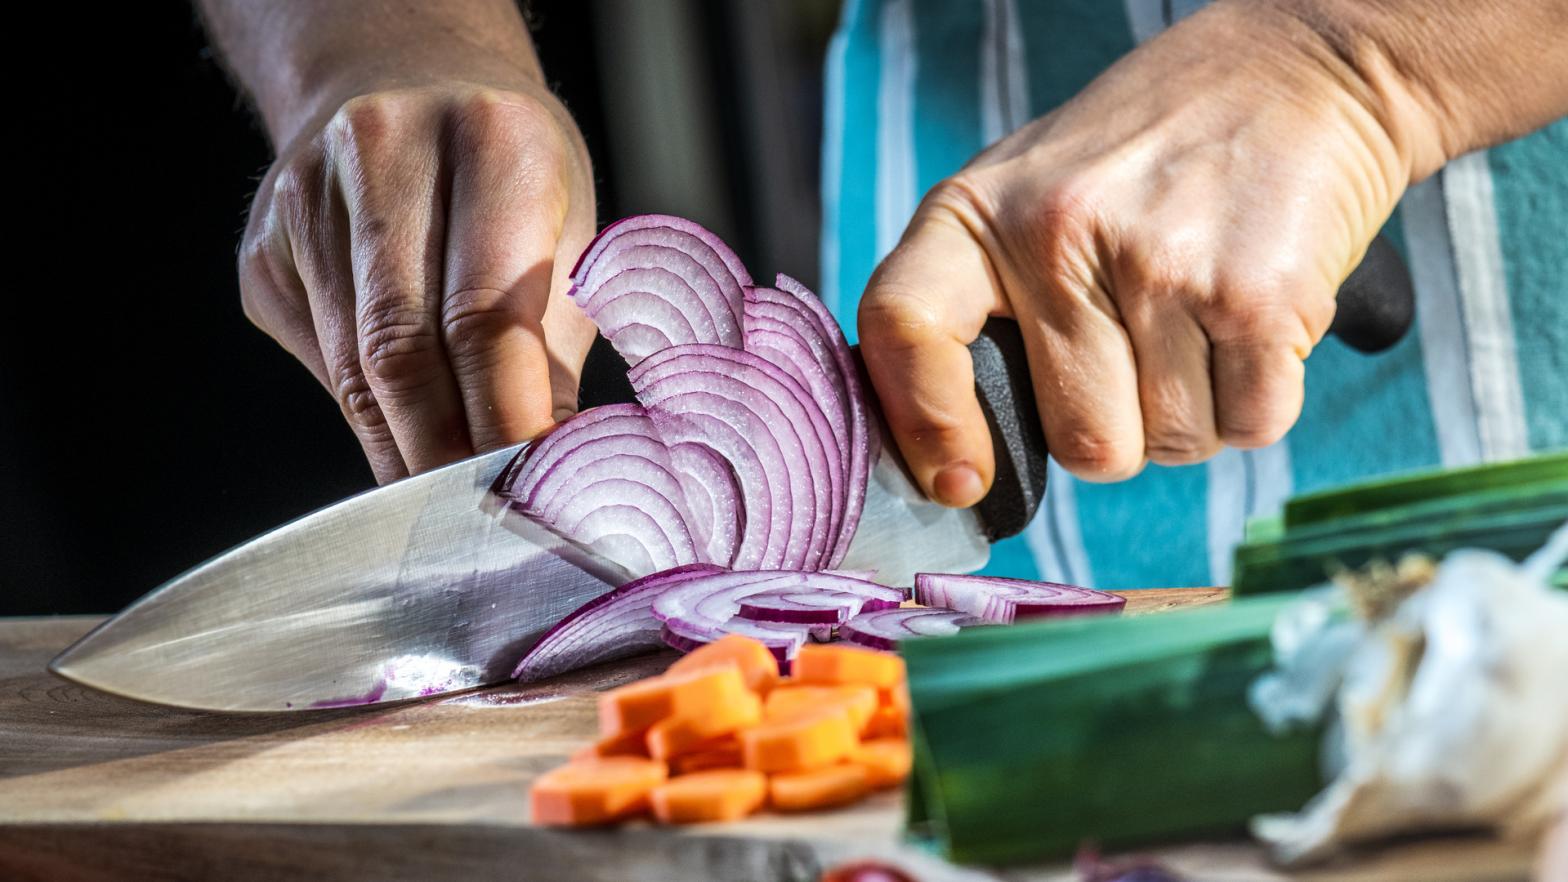 Man cutting vegetable in kitchen. Male hands making thin slices of purple onion.